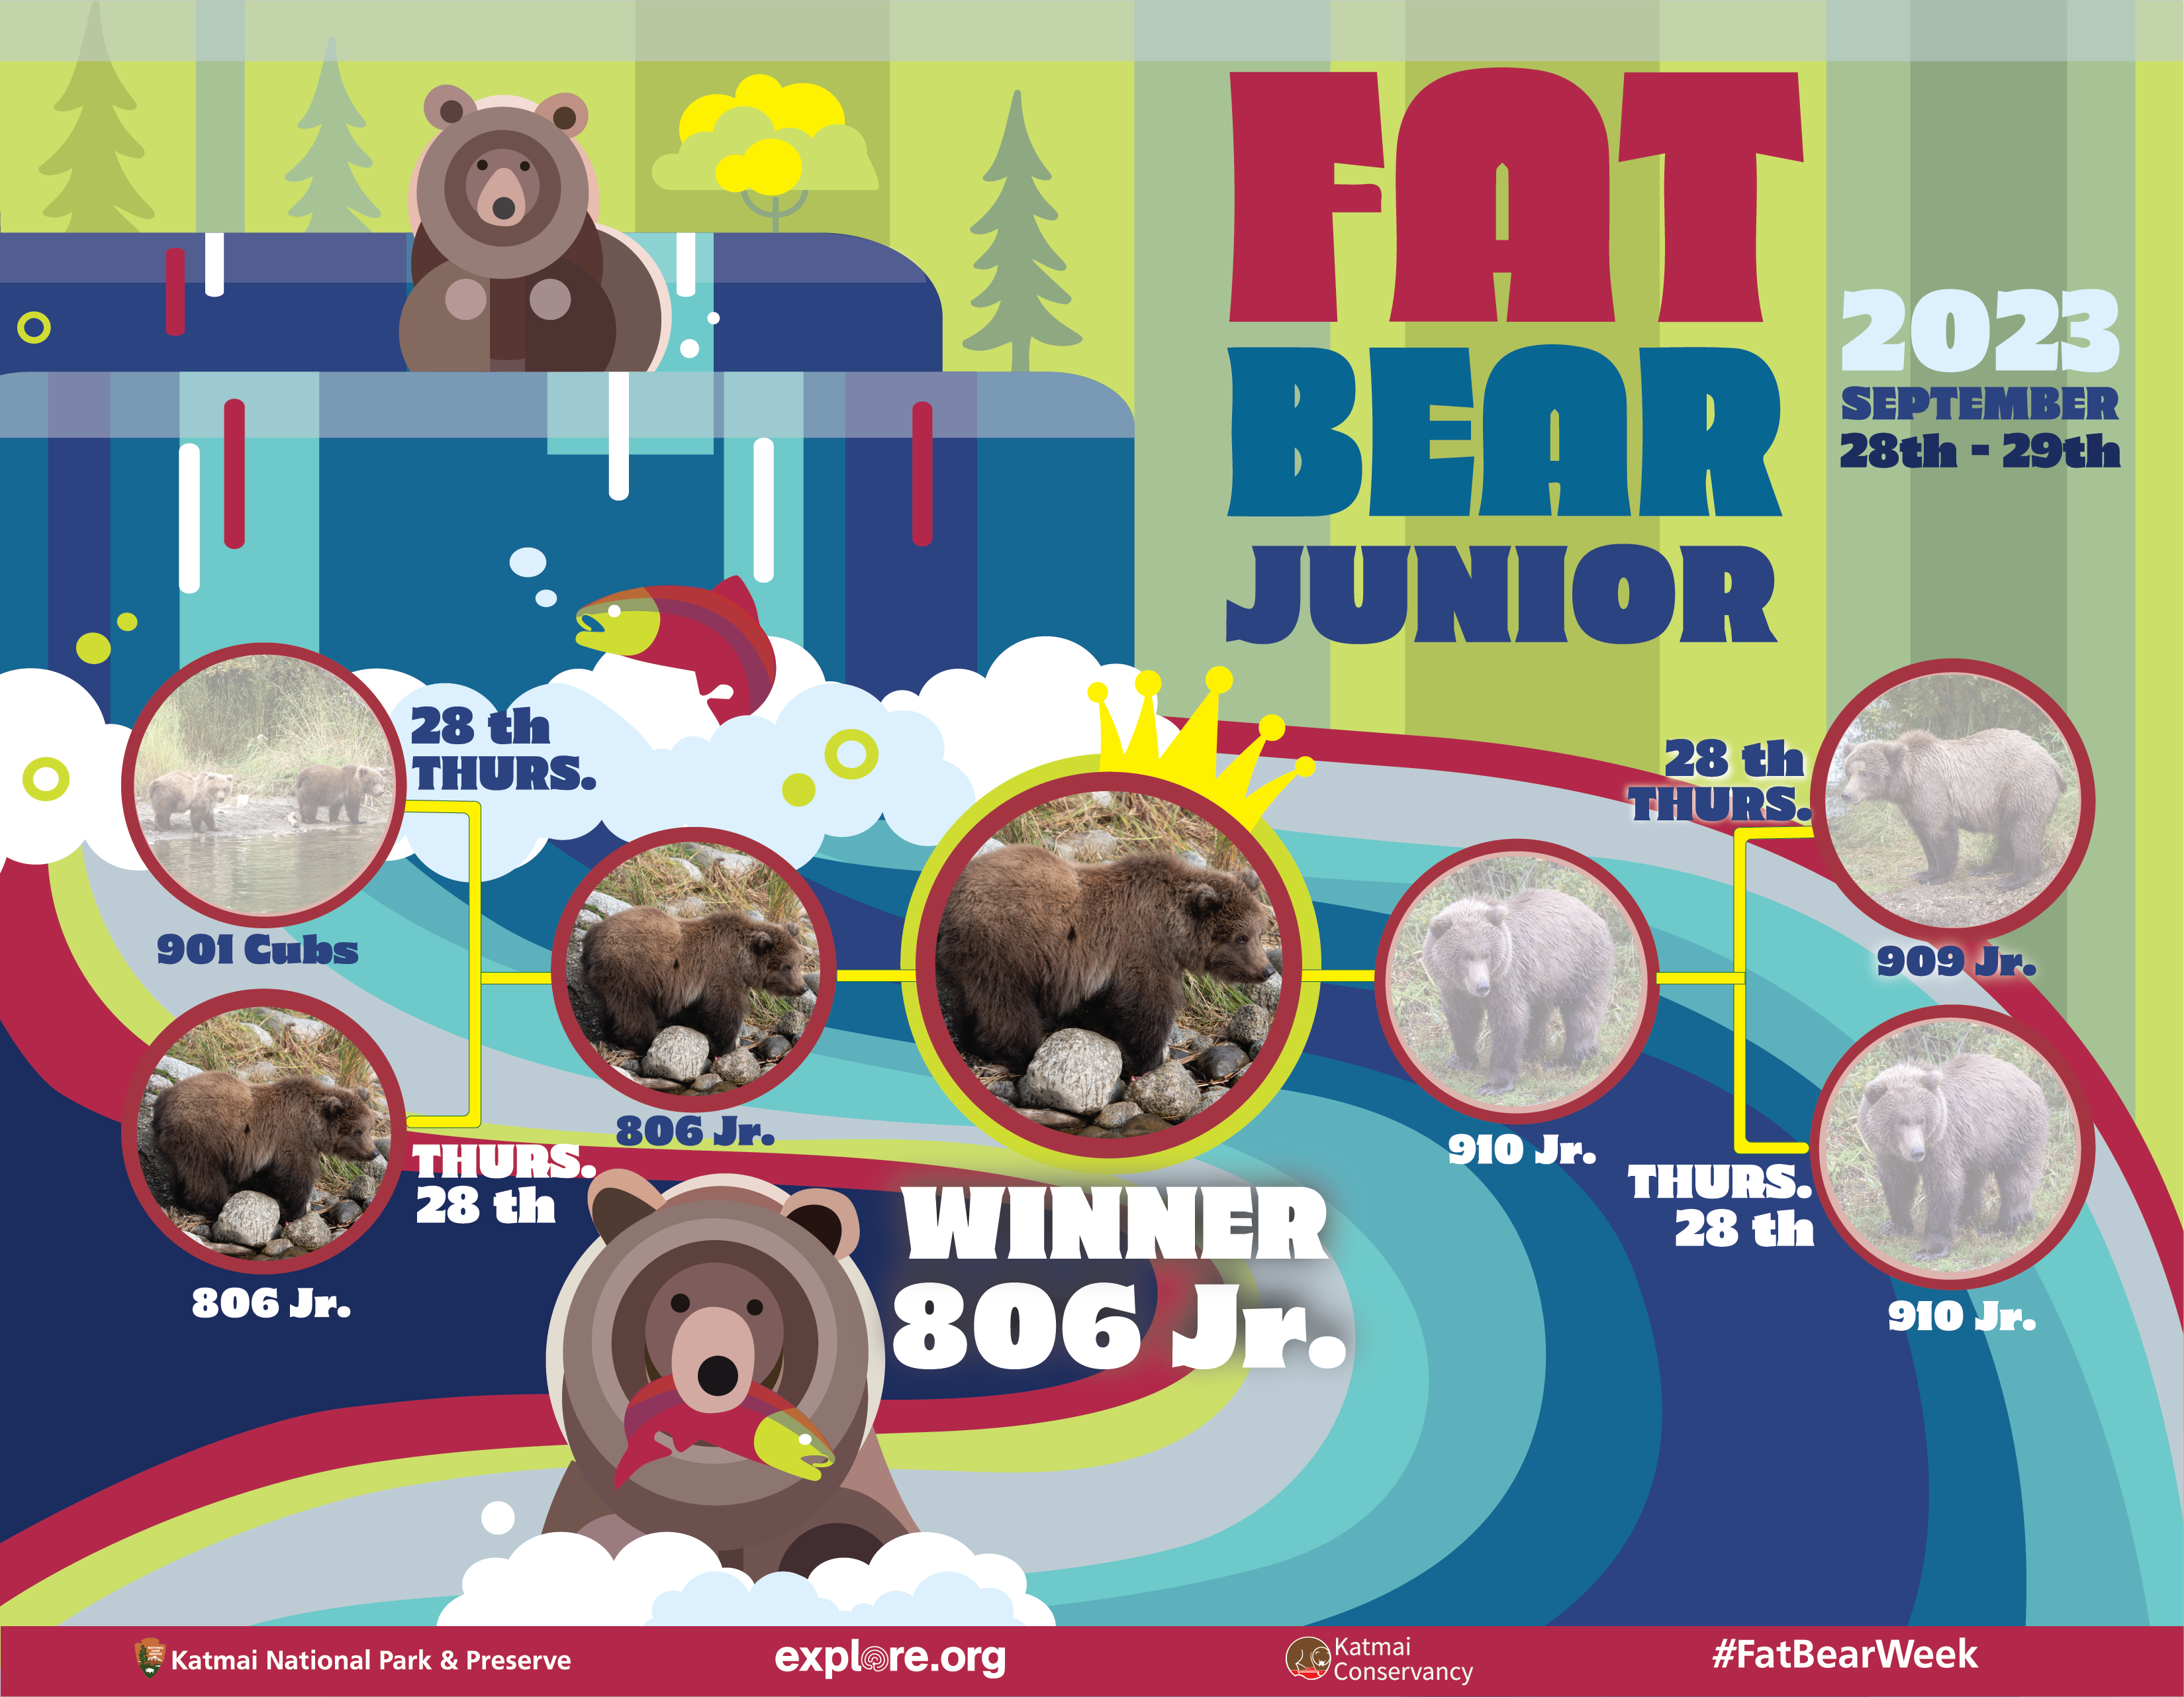 The Fat Bear Junior 2023 bracket updated to show 806's spring cub as the winner!